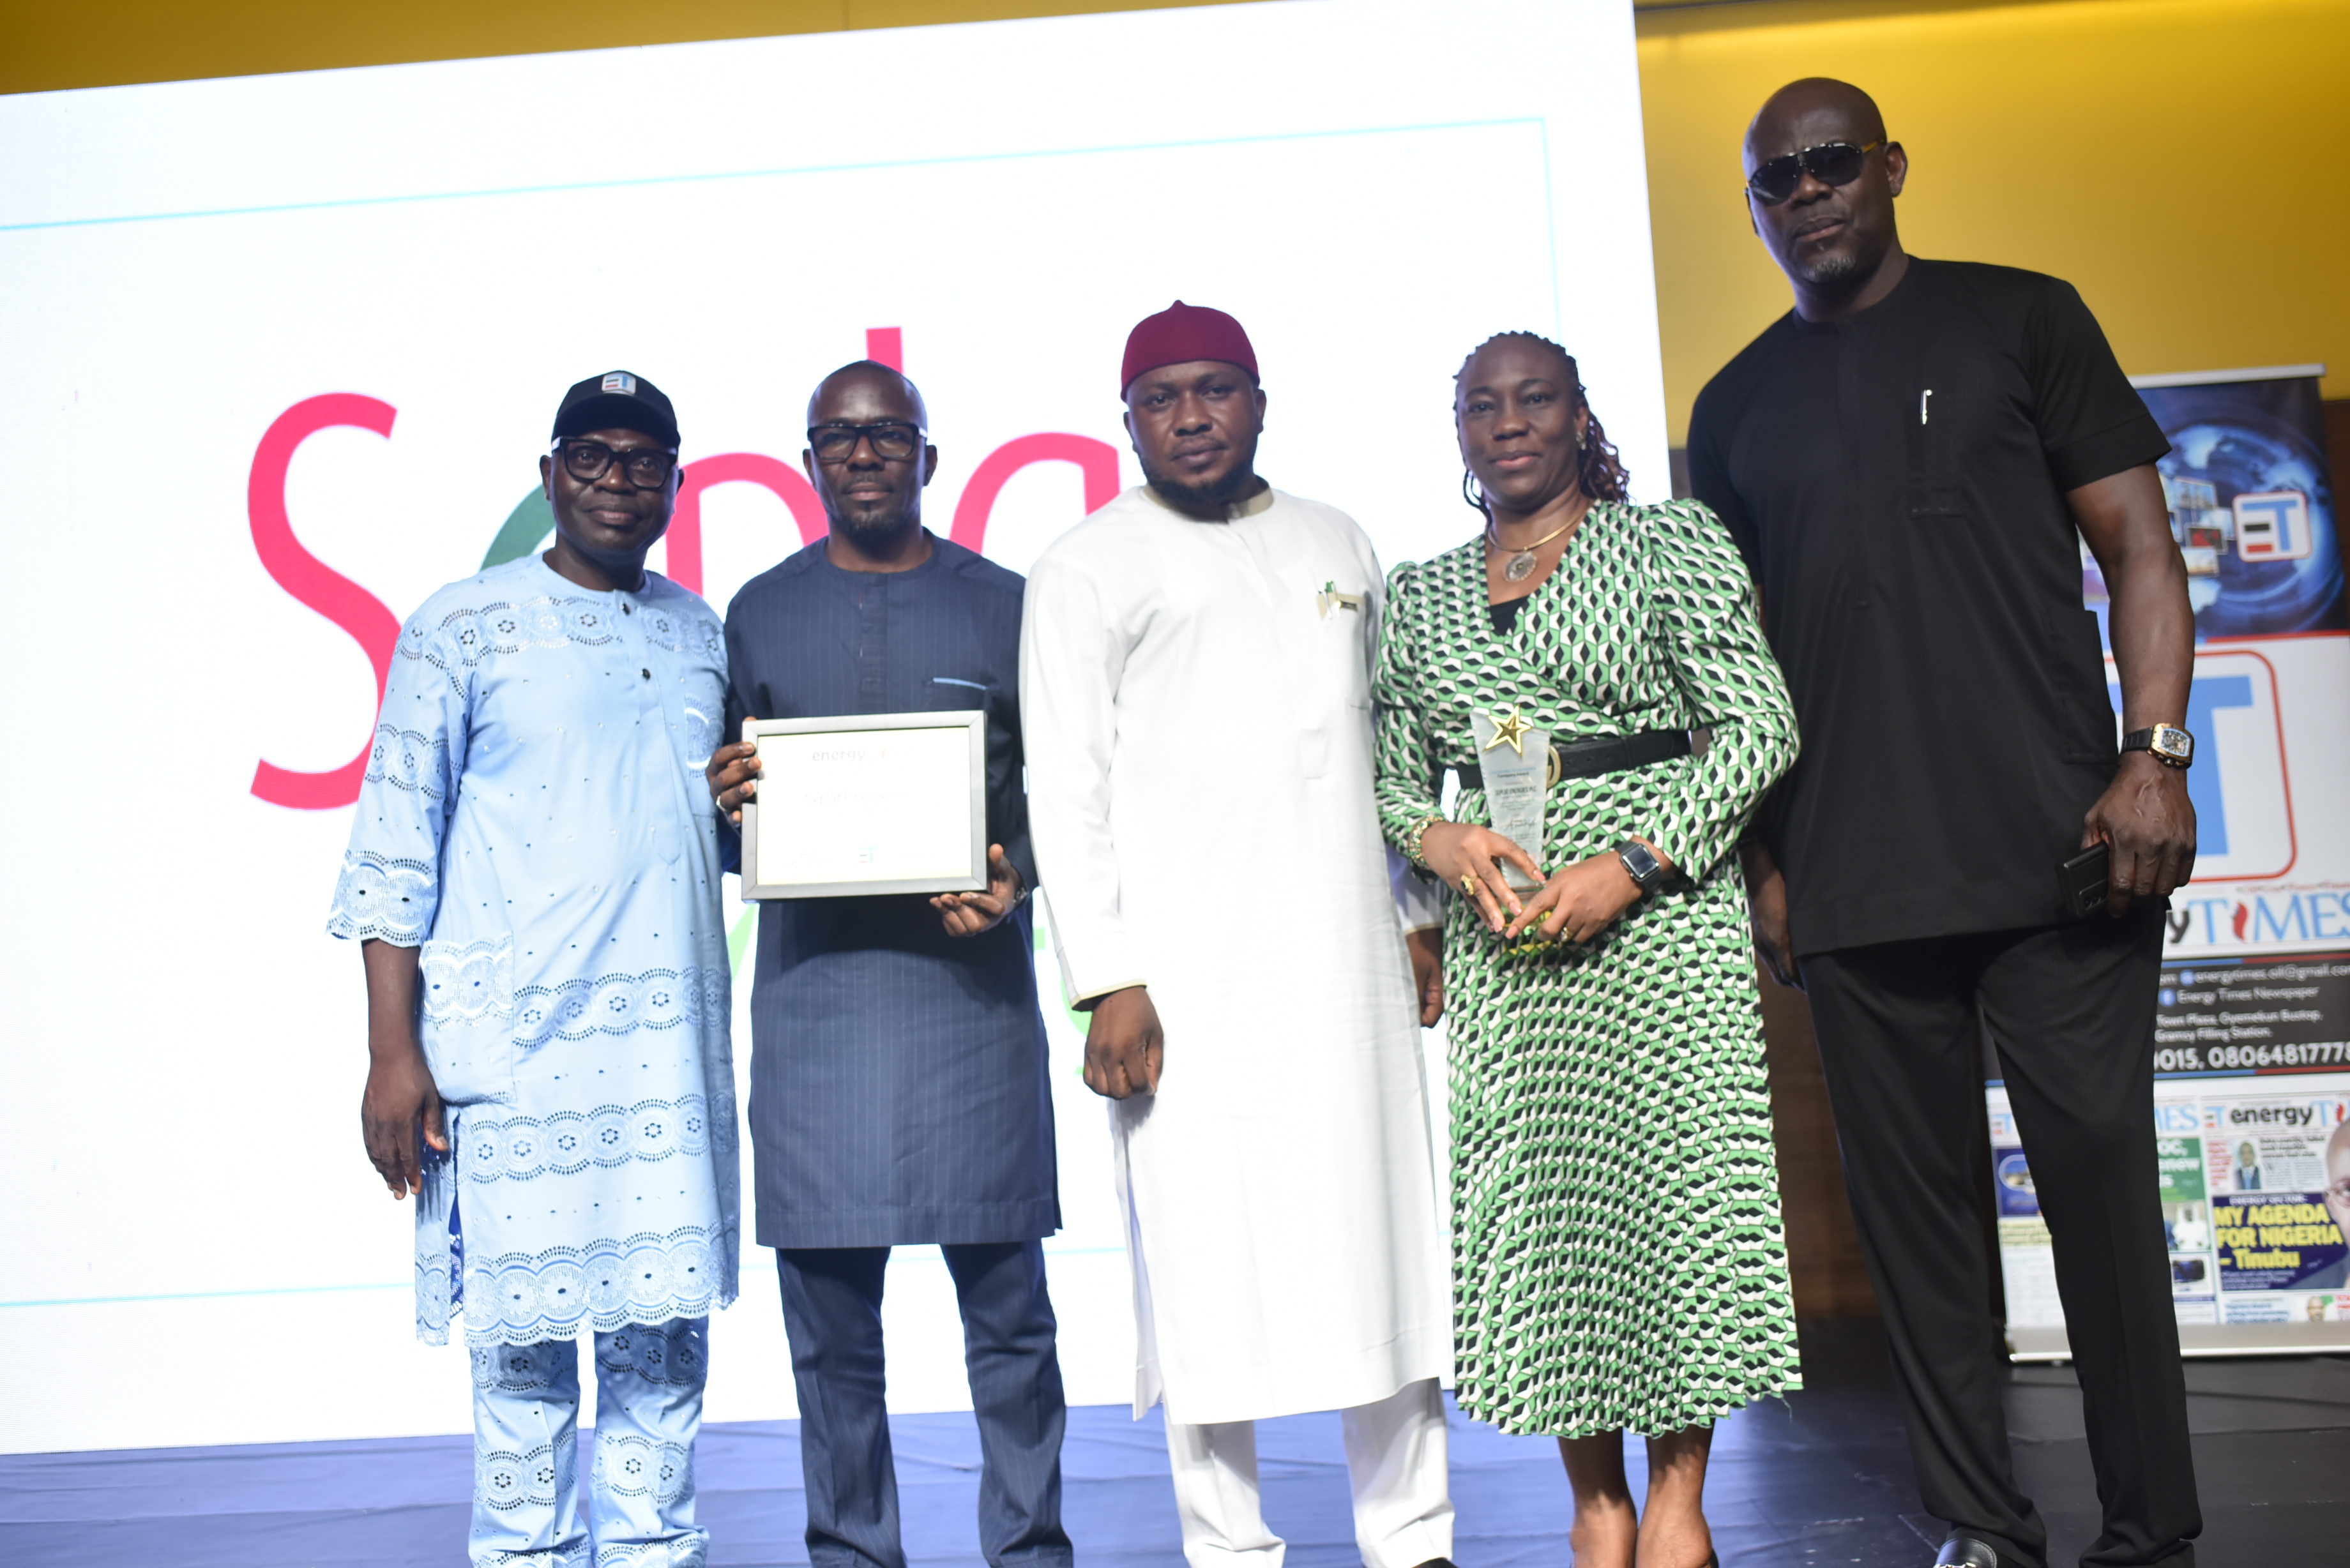 Seplat Energy bags Energy Times’ Corporate Governance Company of the Year